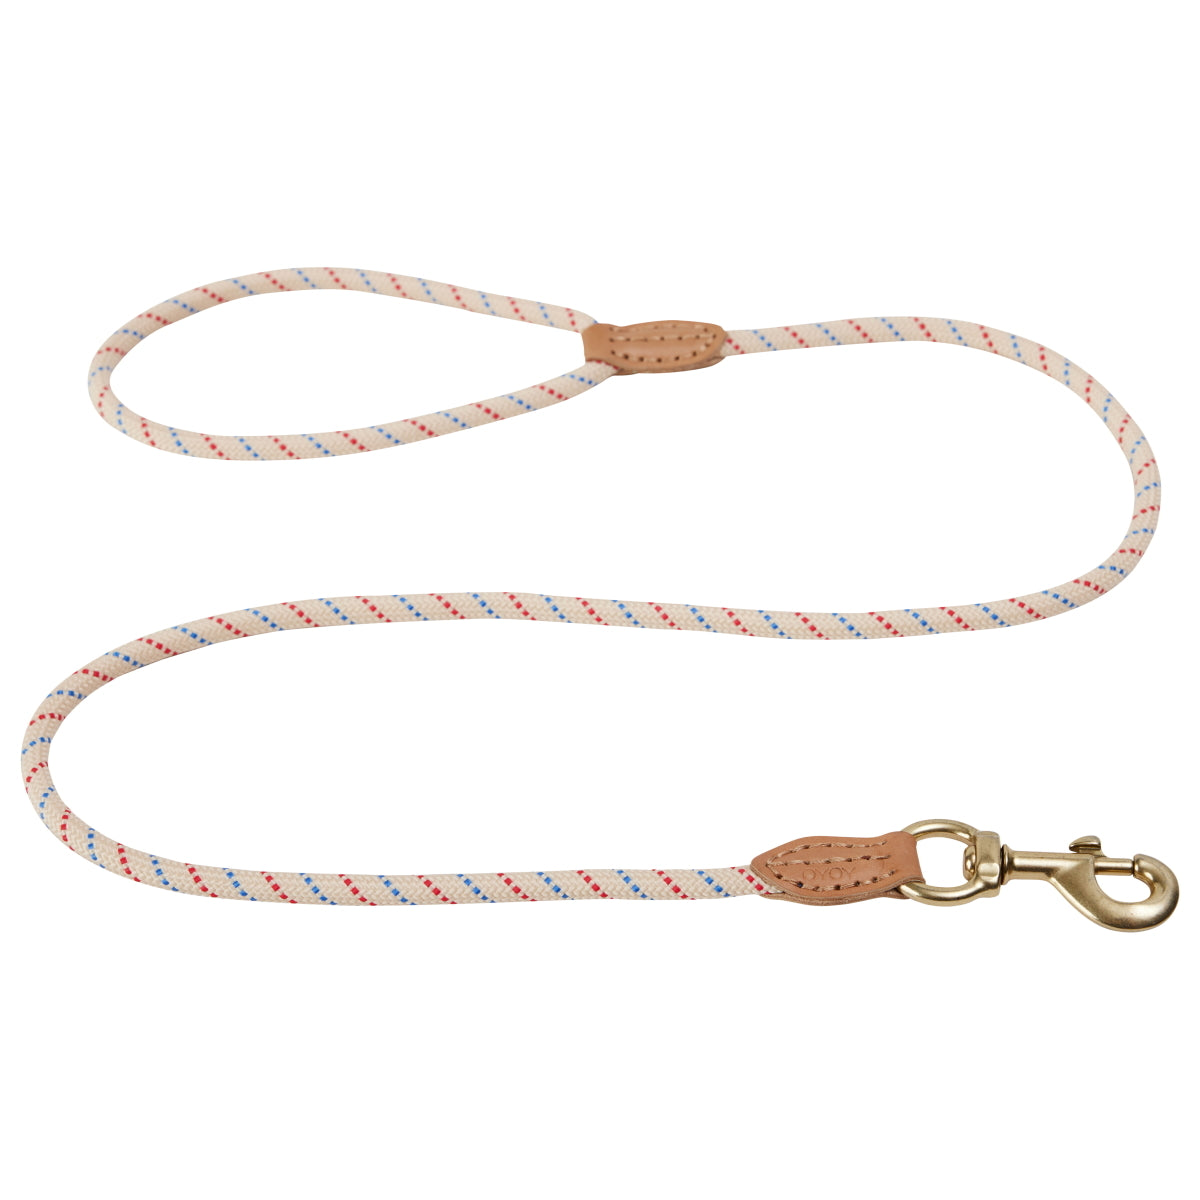 OYOY Perry Dog Leash Mellow